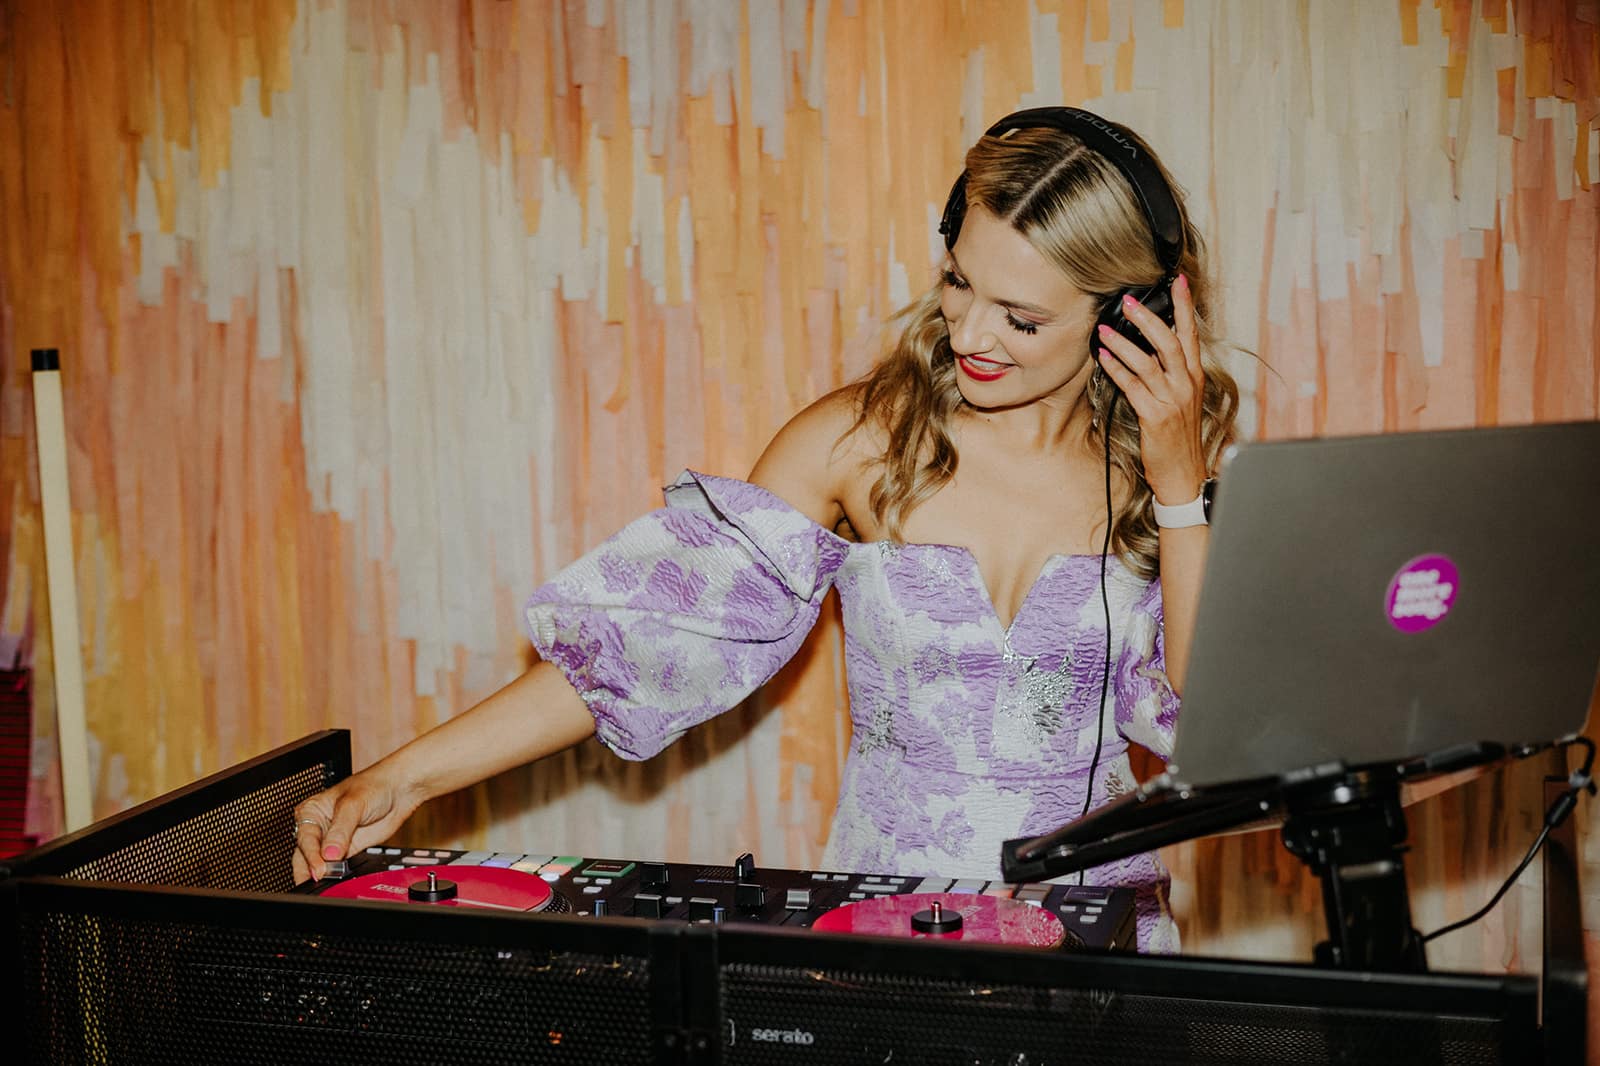 DJ-and-Wedding-Podcast-Host-DJ-Aleks-Mac-Behind-the-Decks-Photographed-by-Caity-and-Duncan